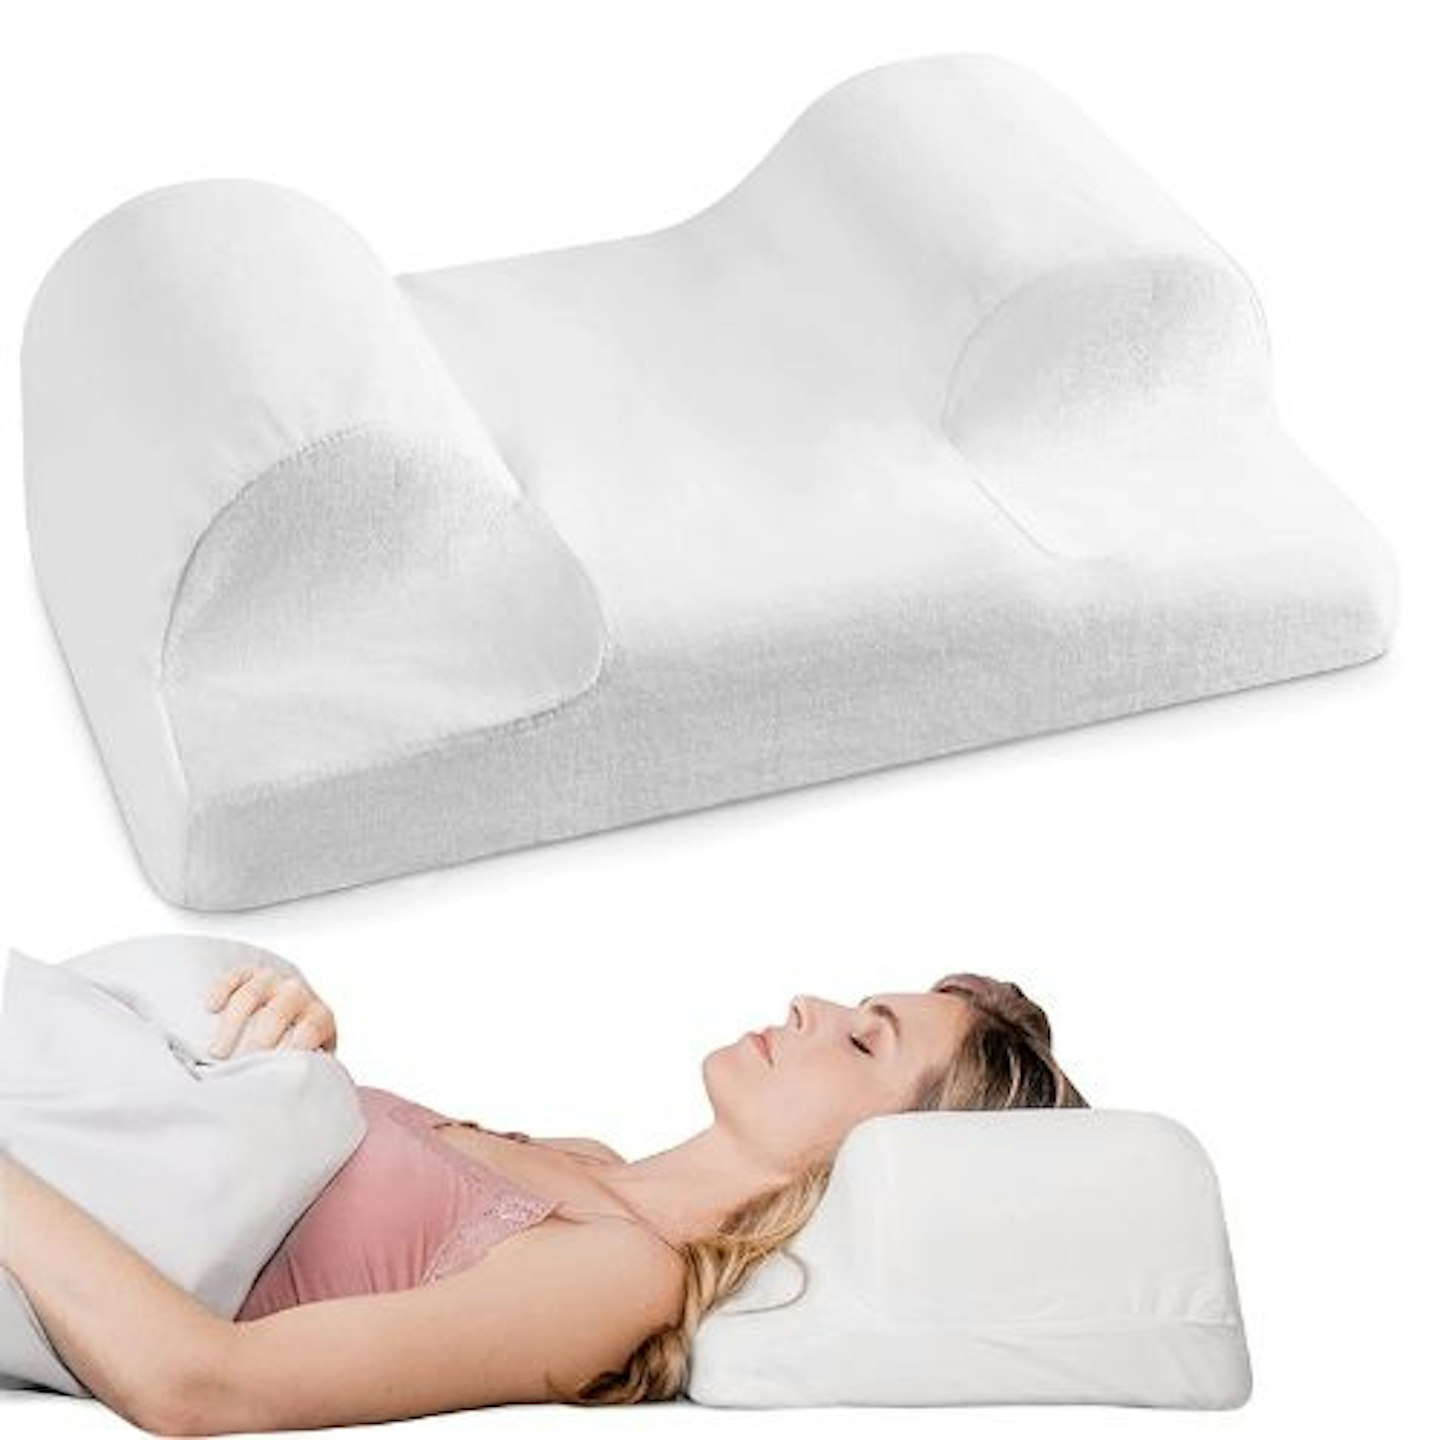  YourFacePillow Beauty Pillow - Anti Wrinkle & Anti Aging Back Sleeping Pillow